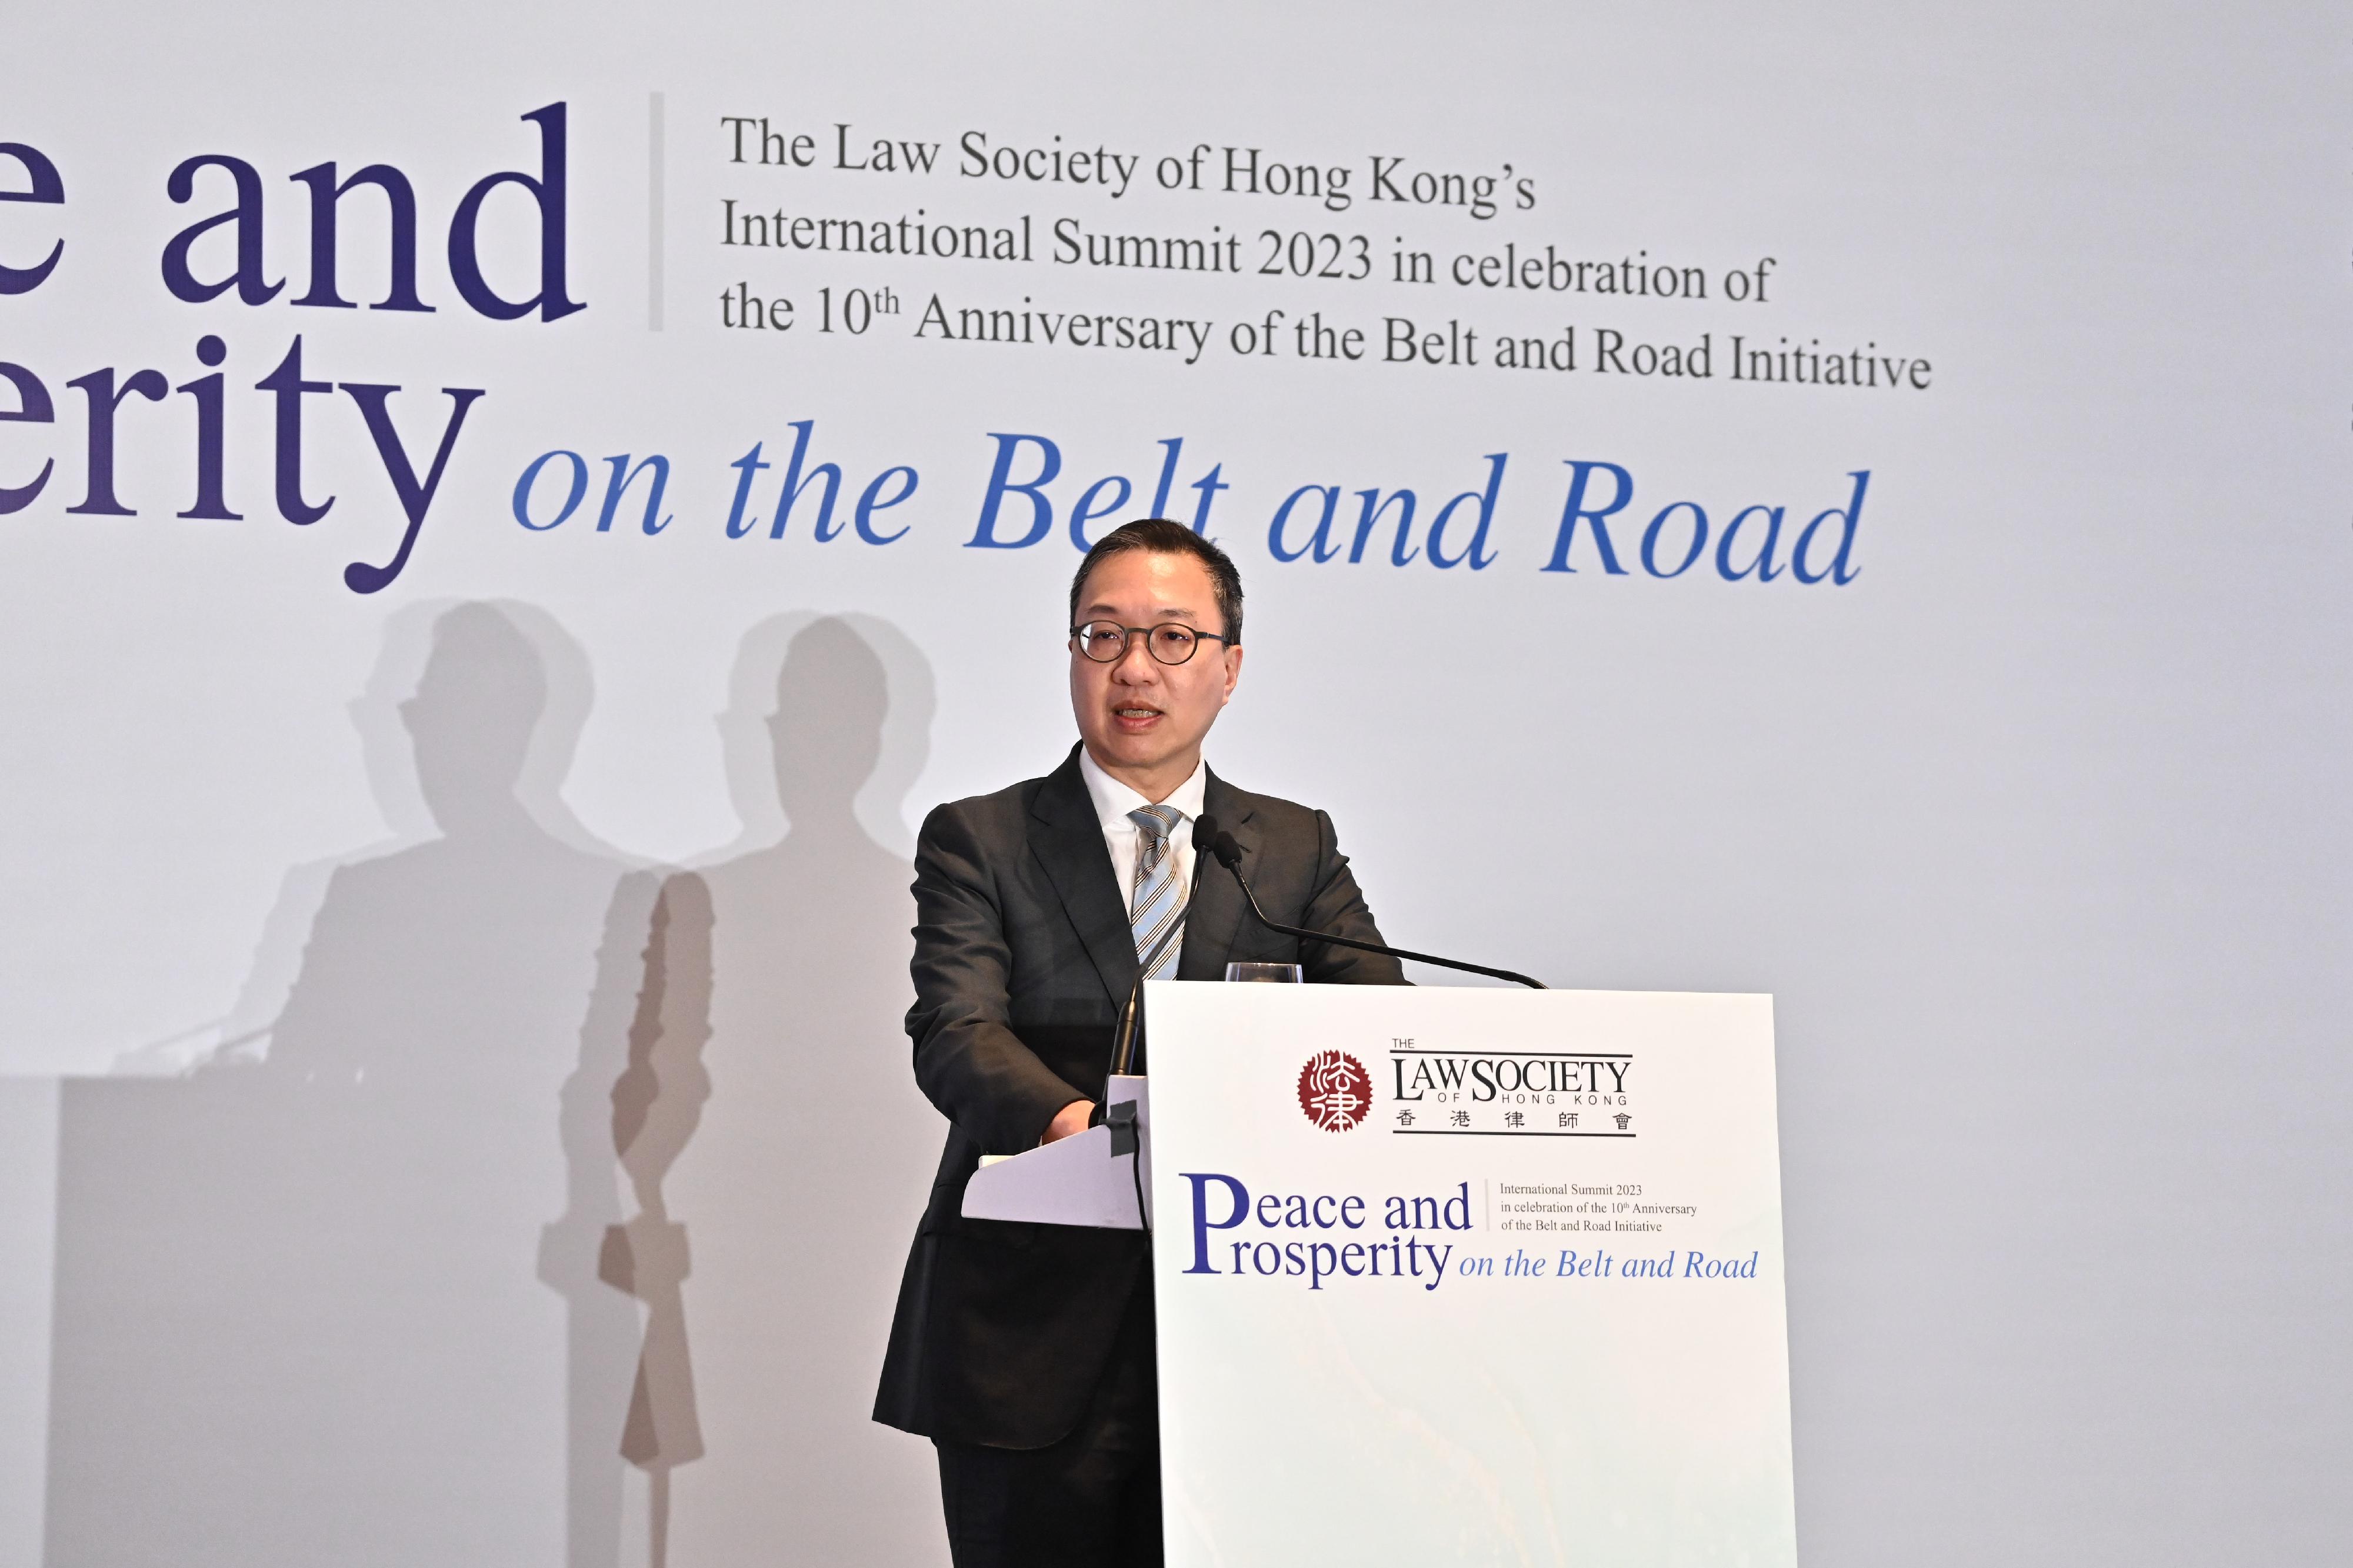 The Secretary for Justice, Mr Paul Lam, SC, speaks at the Law Society of Hong Kong's International Summit 2023 in celebration of the 10th Anniversary of the Belt and Road Initiative today (October 11).
